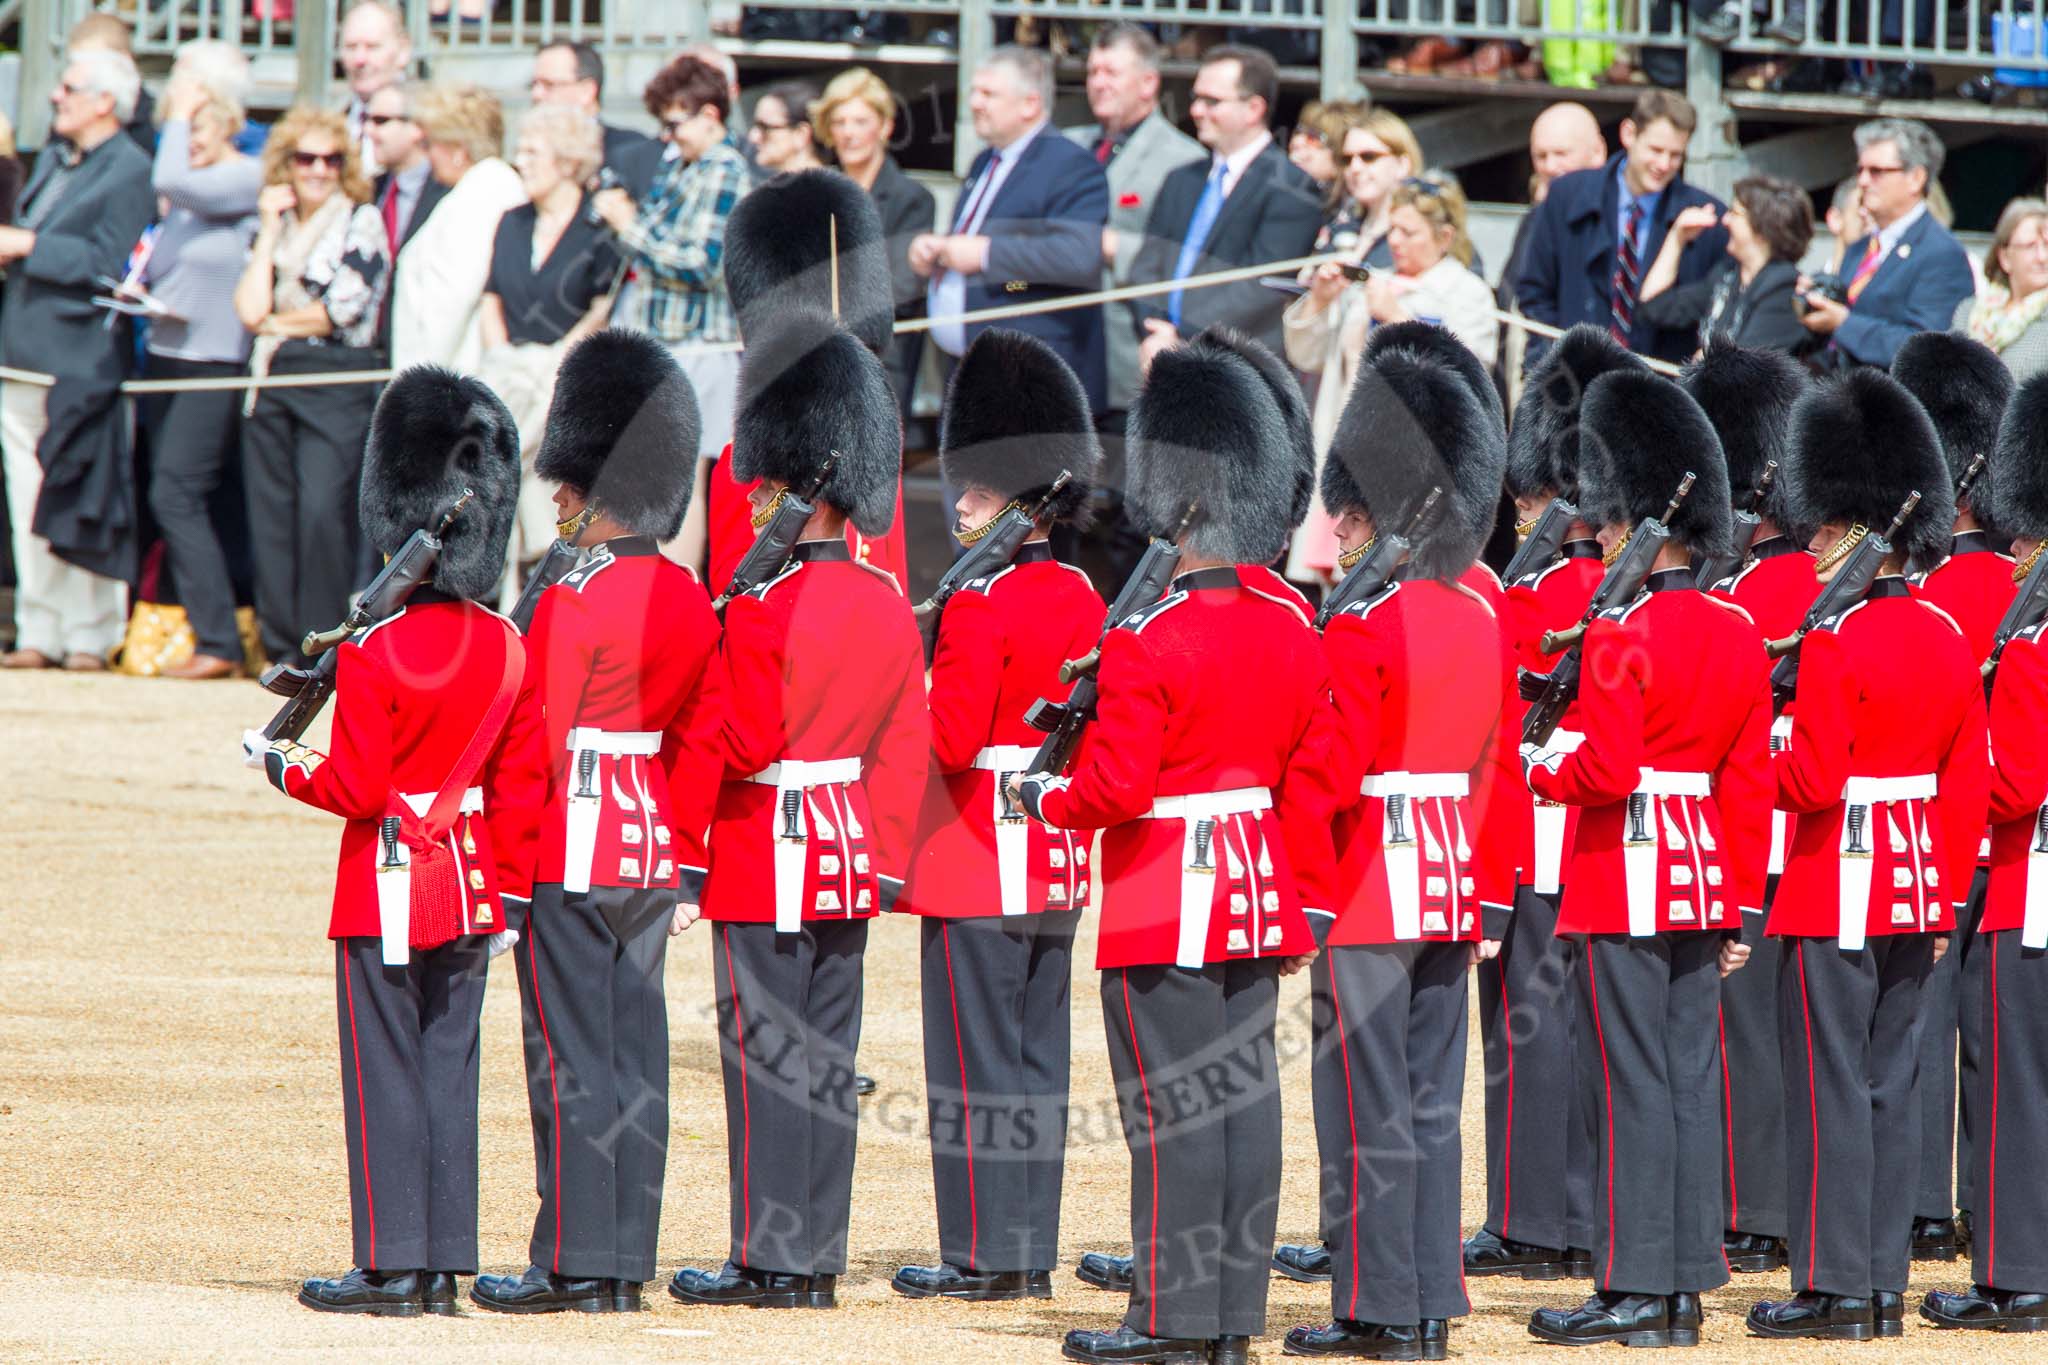 Trooping the Colour 2012: No. 6 Guard, F Company Scots Guards, getting into position..
Horse Guards Parade, Westminster,
London SW1,

United Kingdom,
on 16 June 2012 at 10:26, image #51